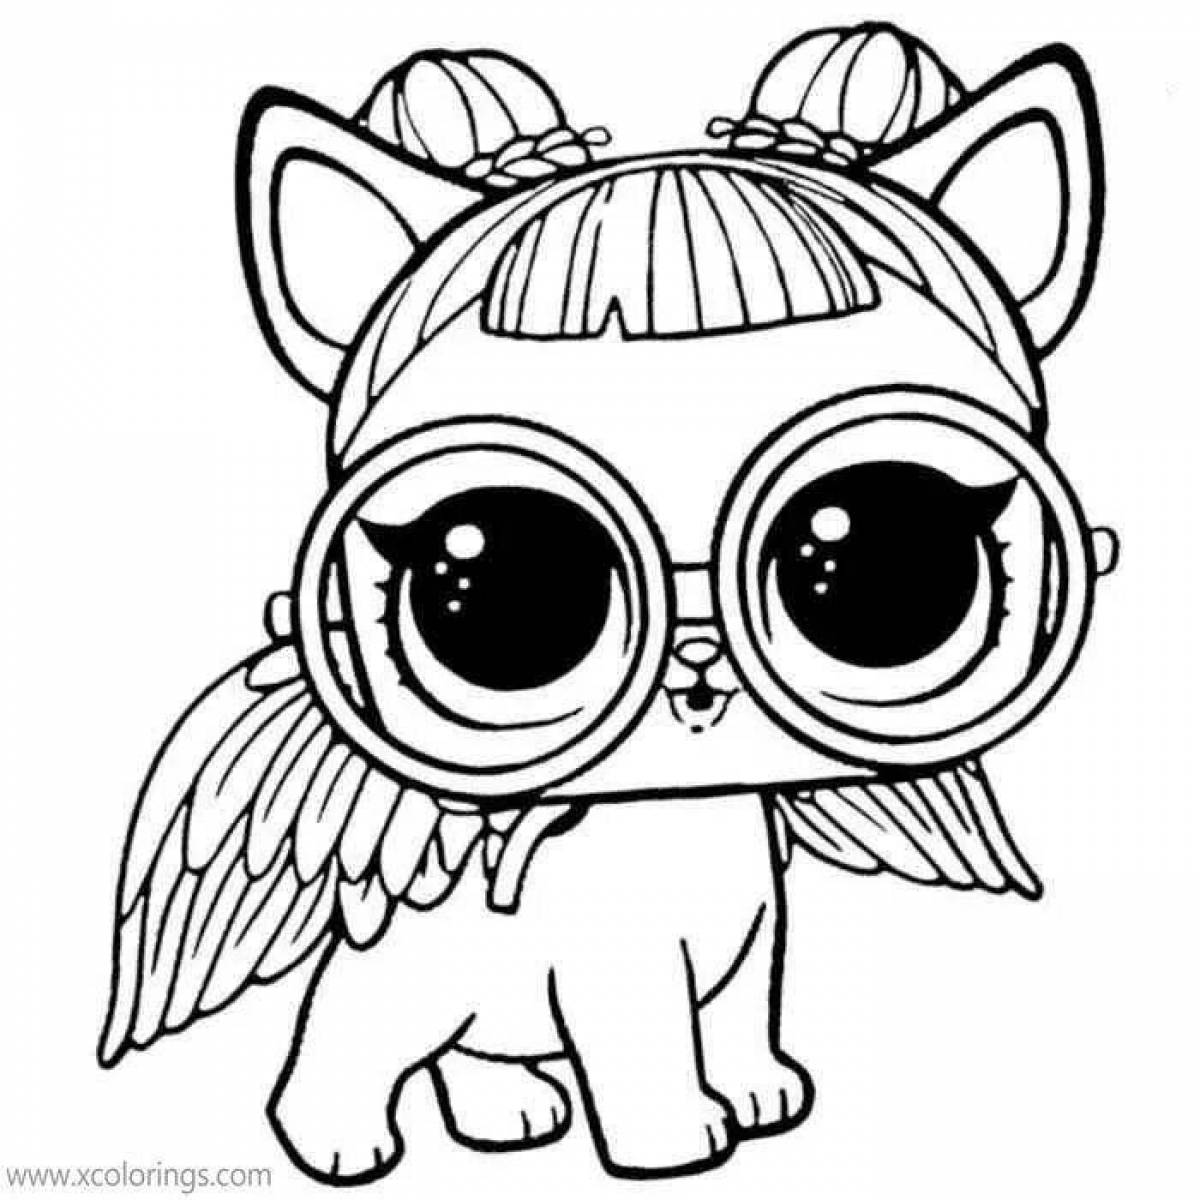 Lovely lolo pets coloring page